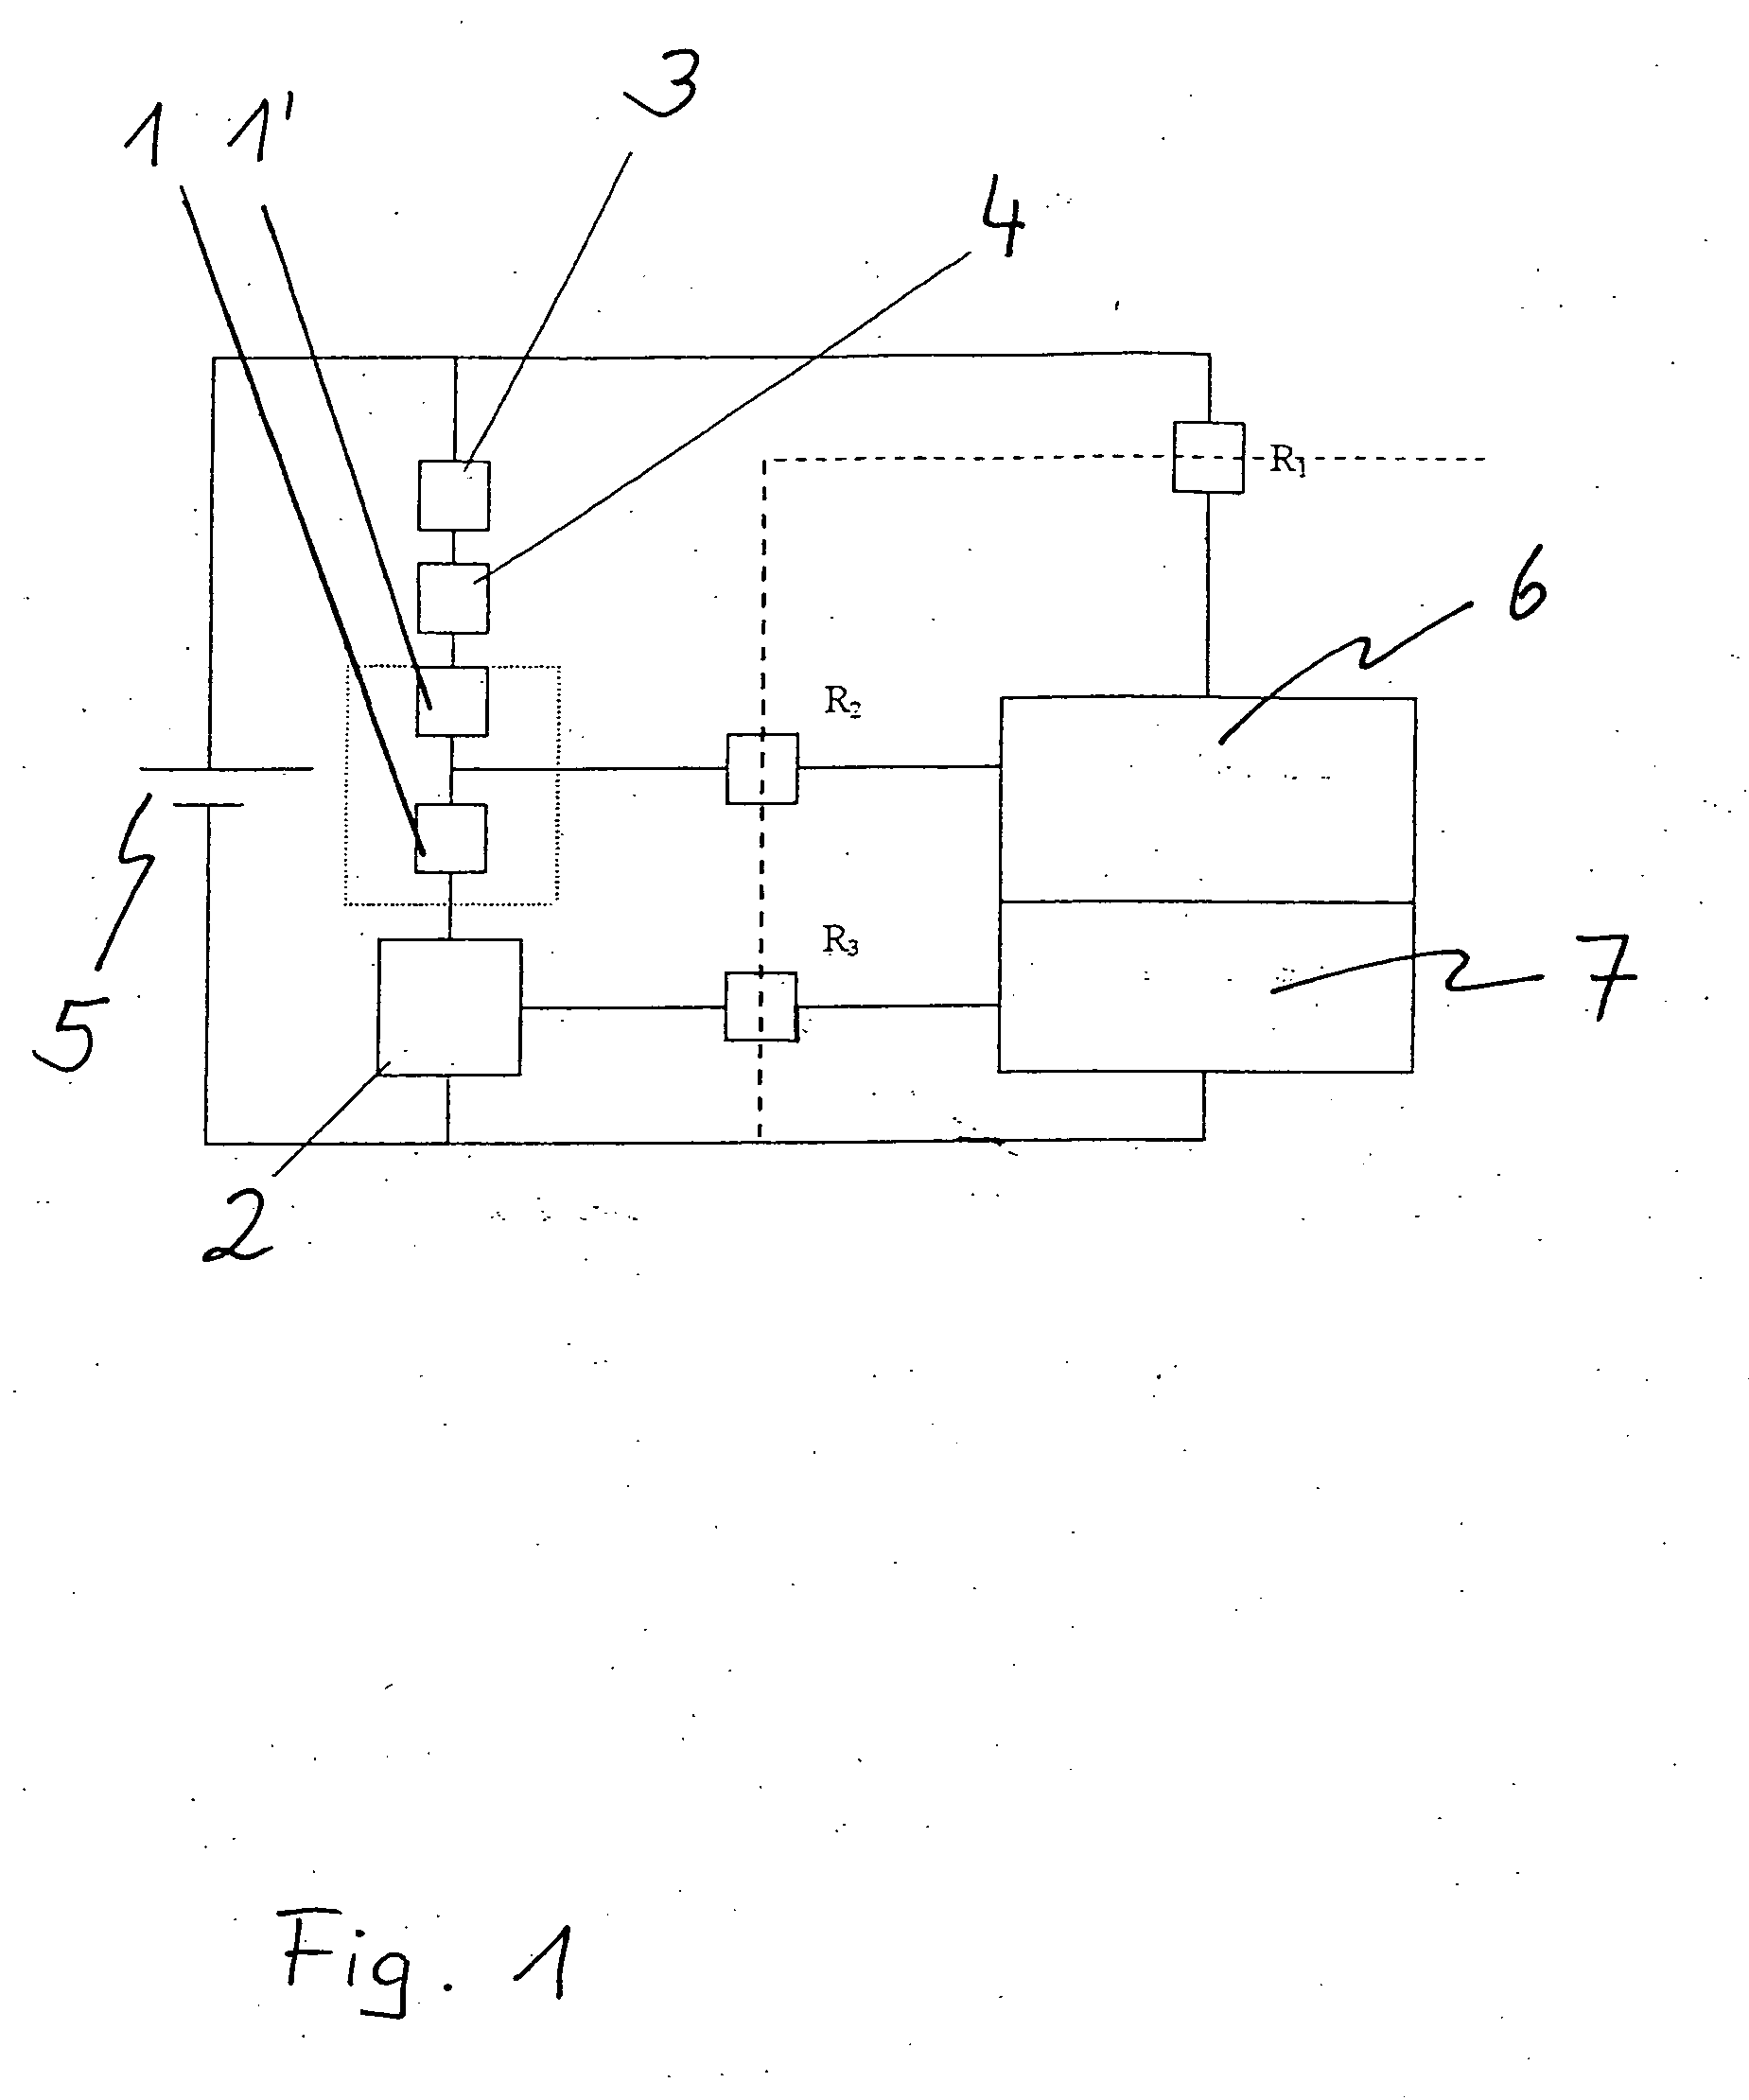 Circuit with at least one catalytic measuring element